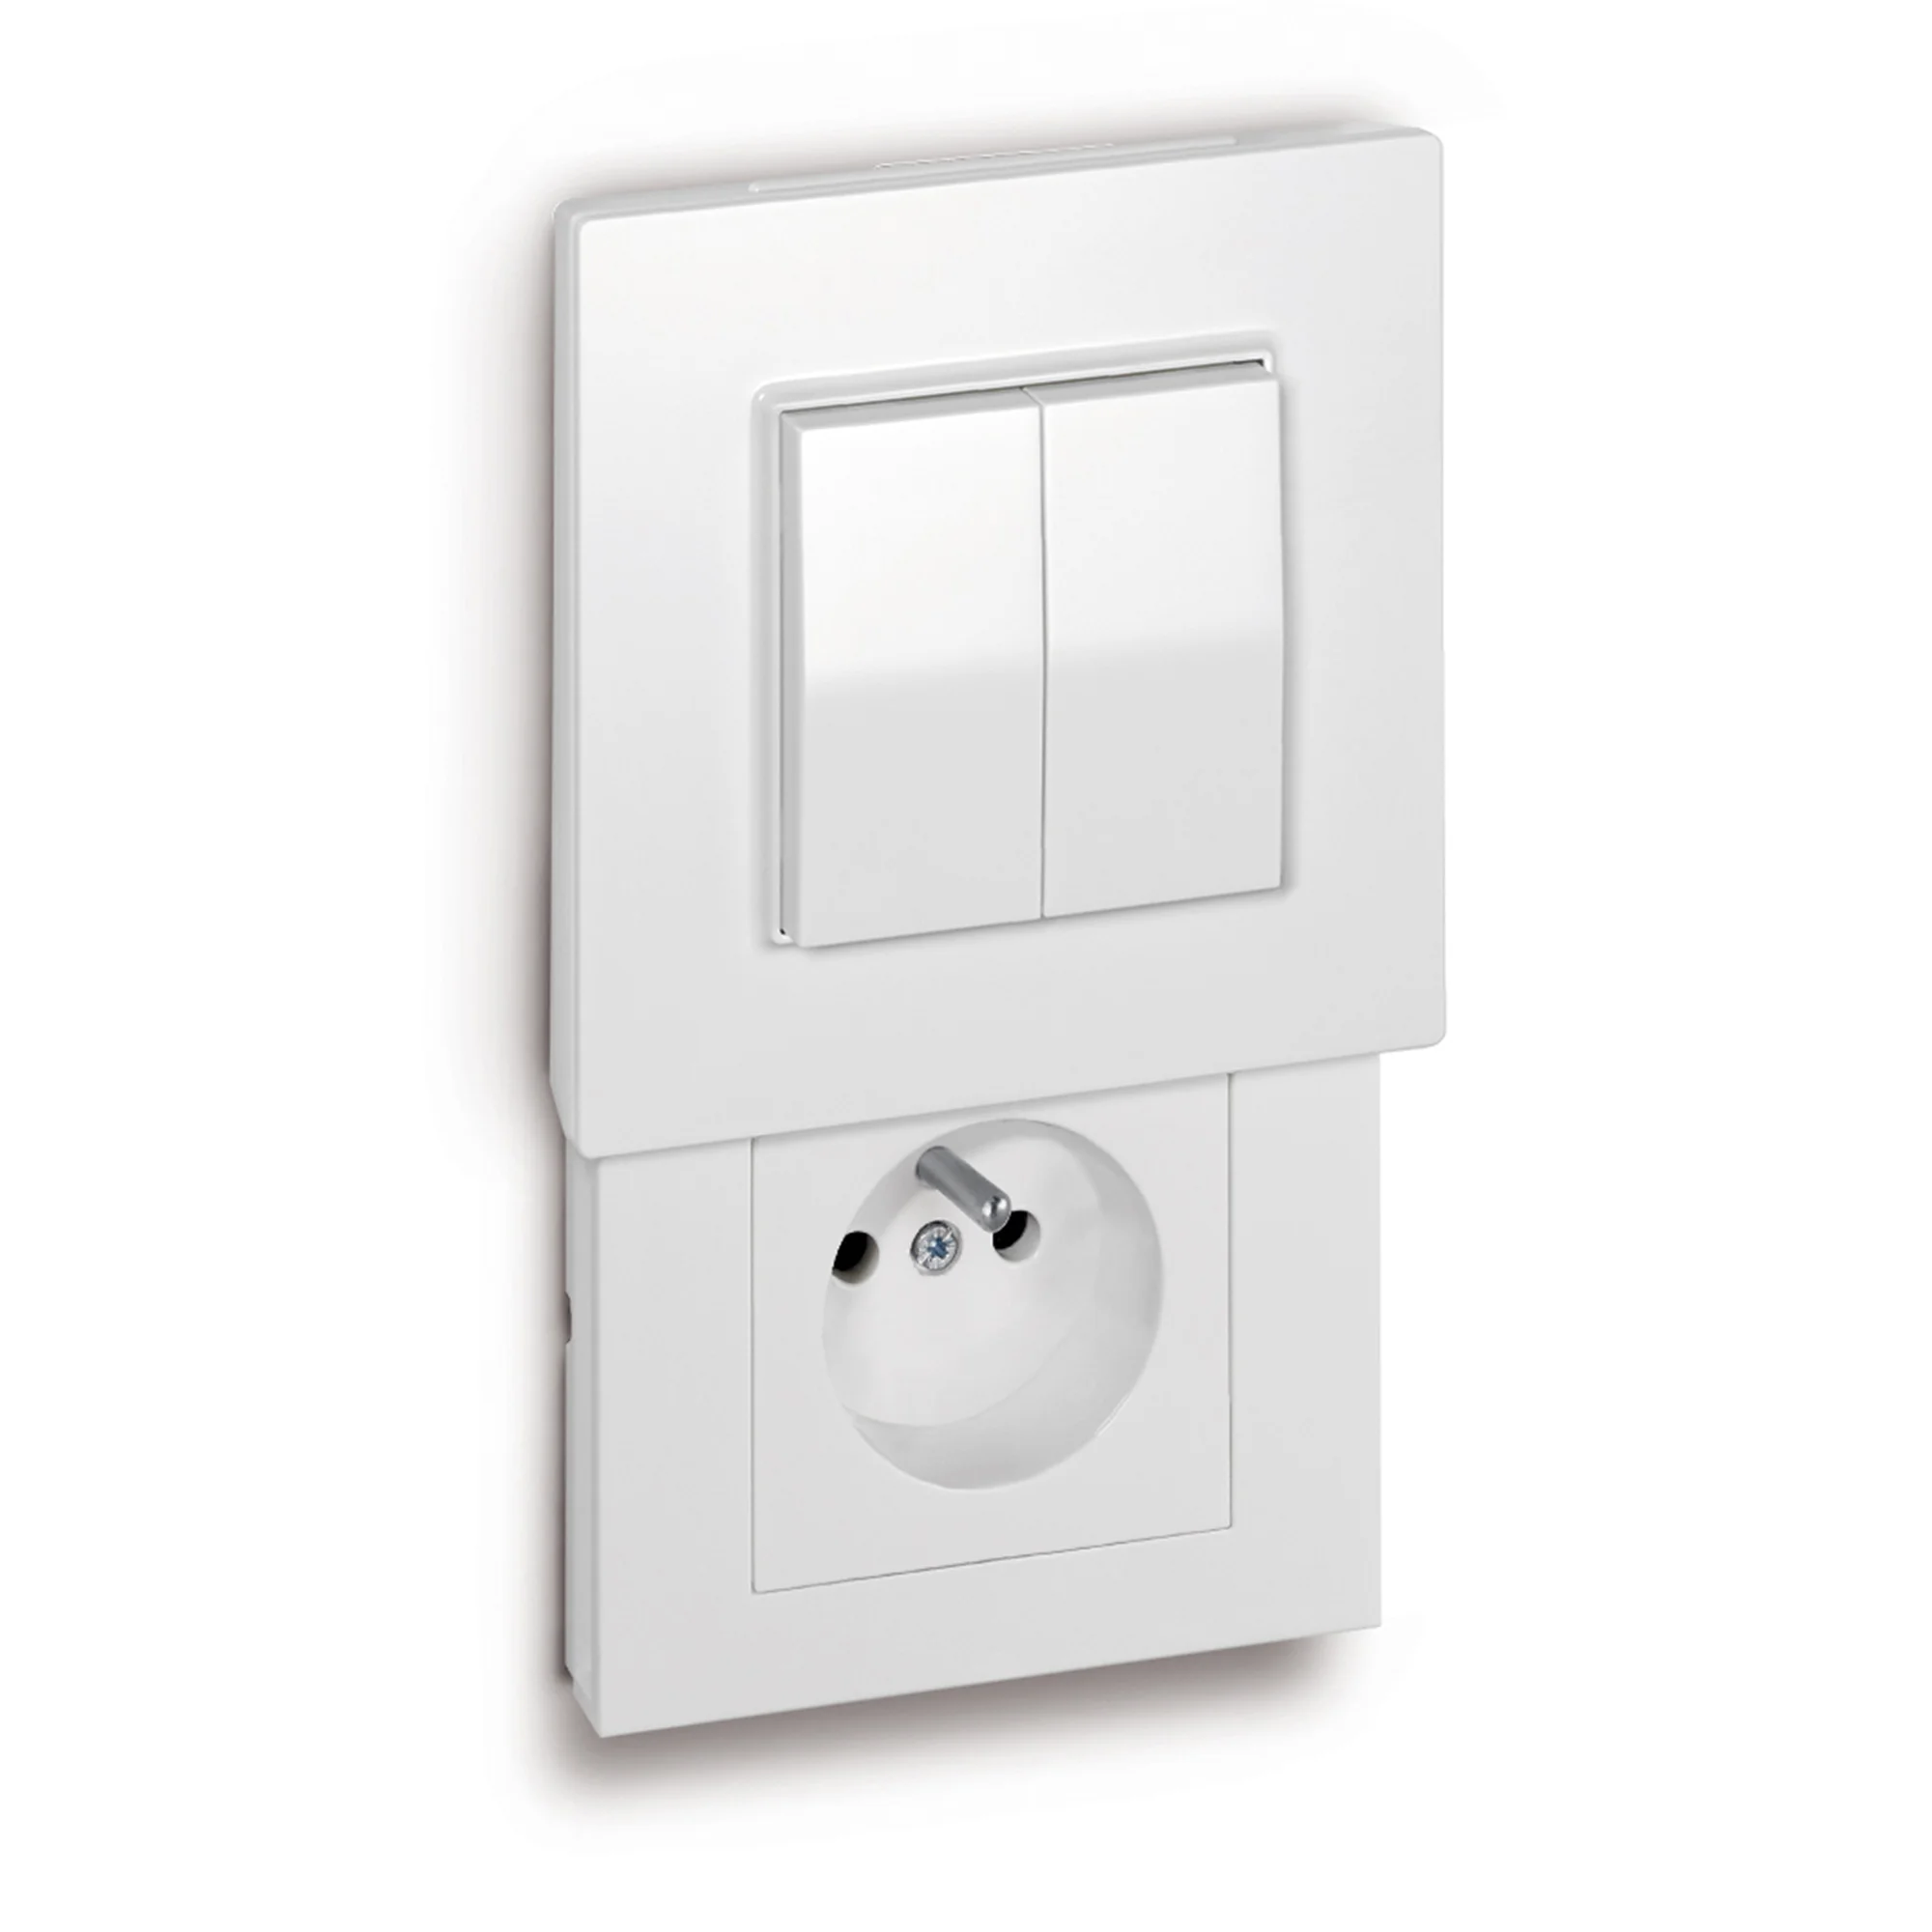 Hidden Socket | Versteckdose® with EnOcean switch with socket insert for plug type E (FR, BE)